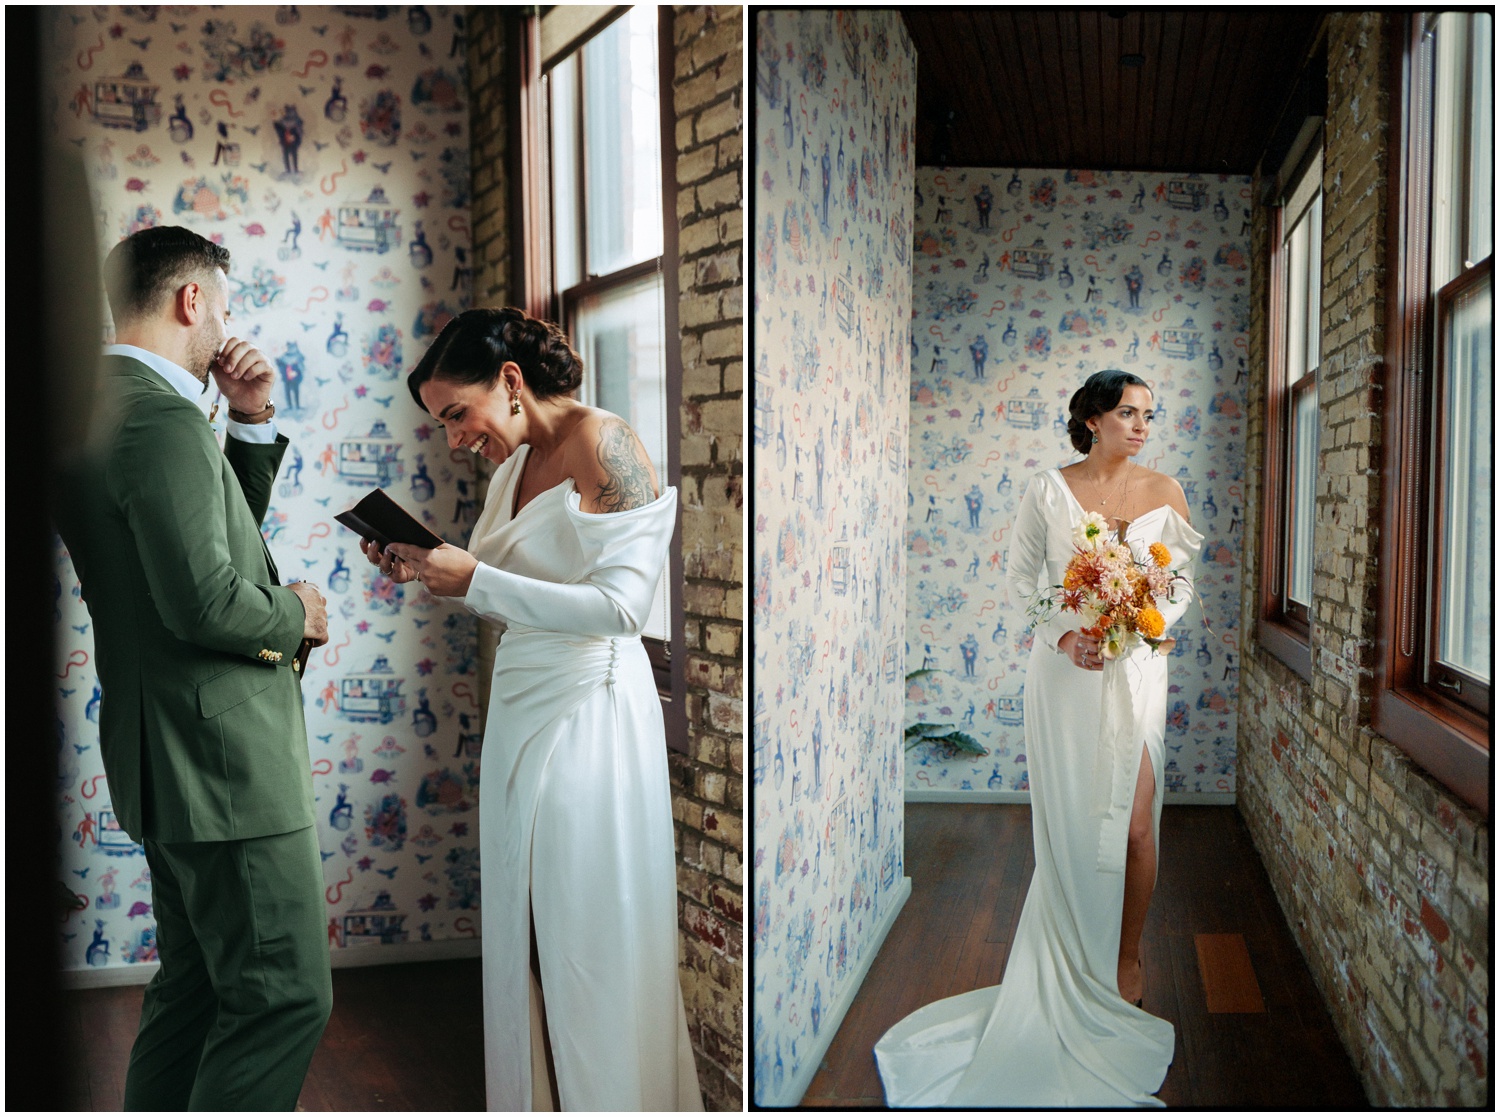 Left: The bride and groom laugh at each others vows. Right: A Philadelphia Bride poses with her bouquet by Bird Seed Florals